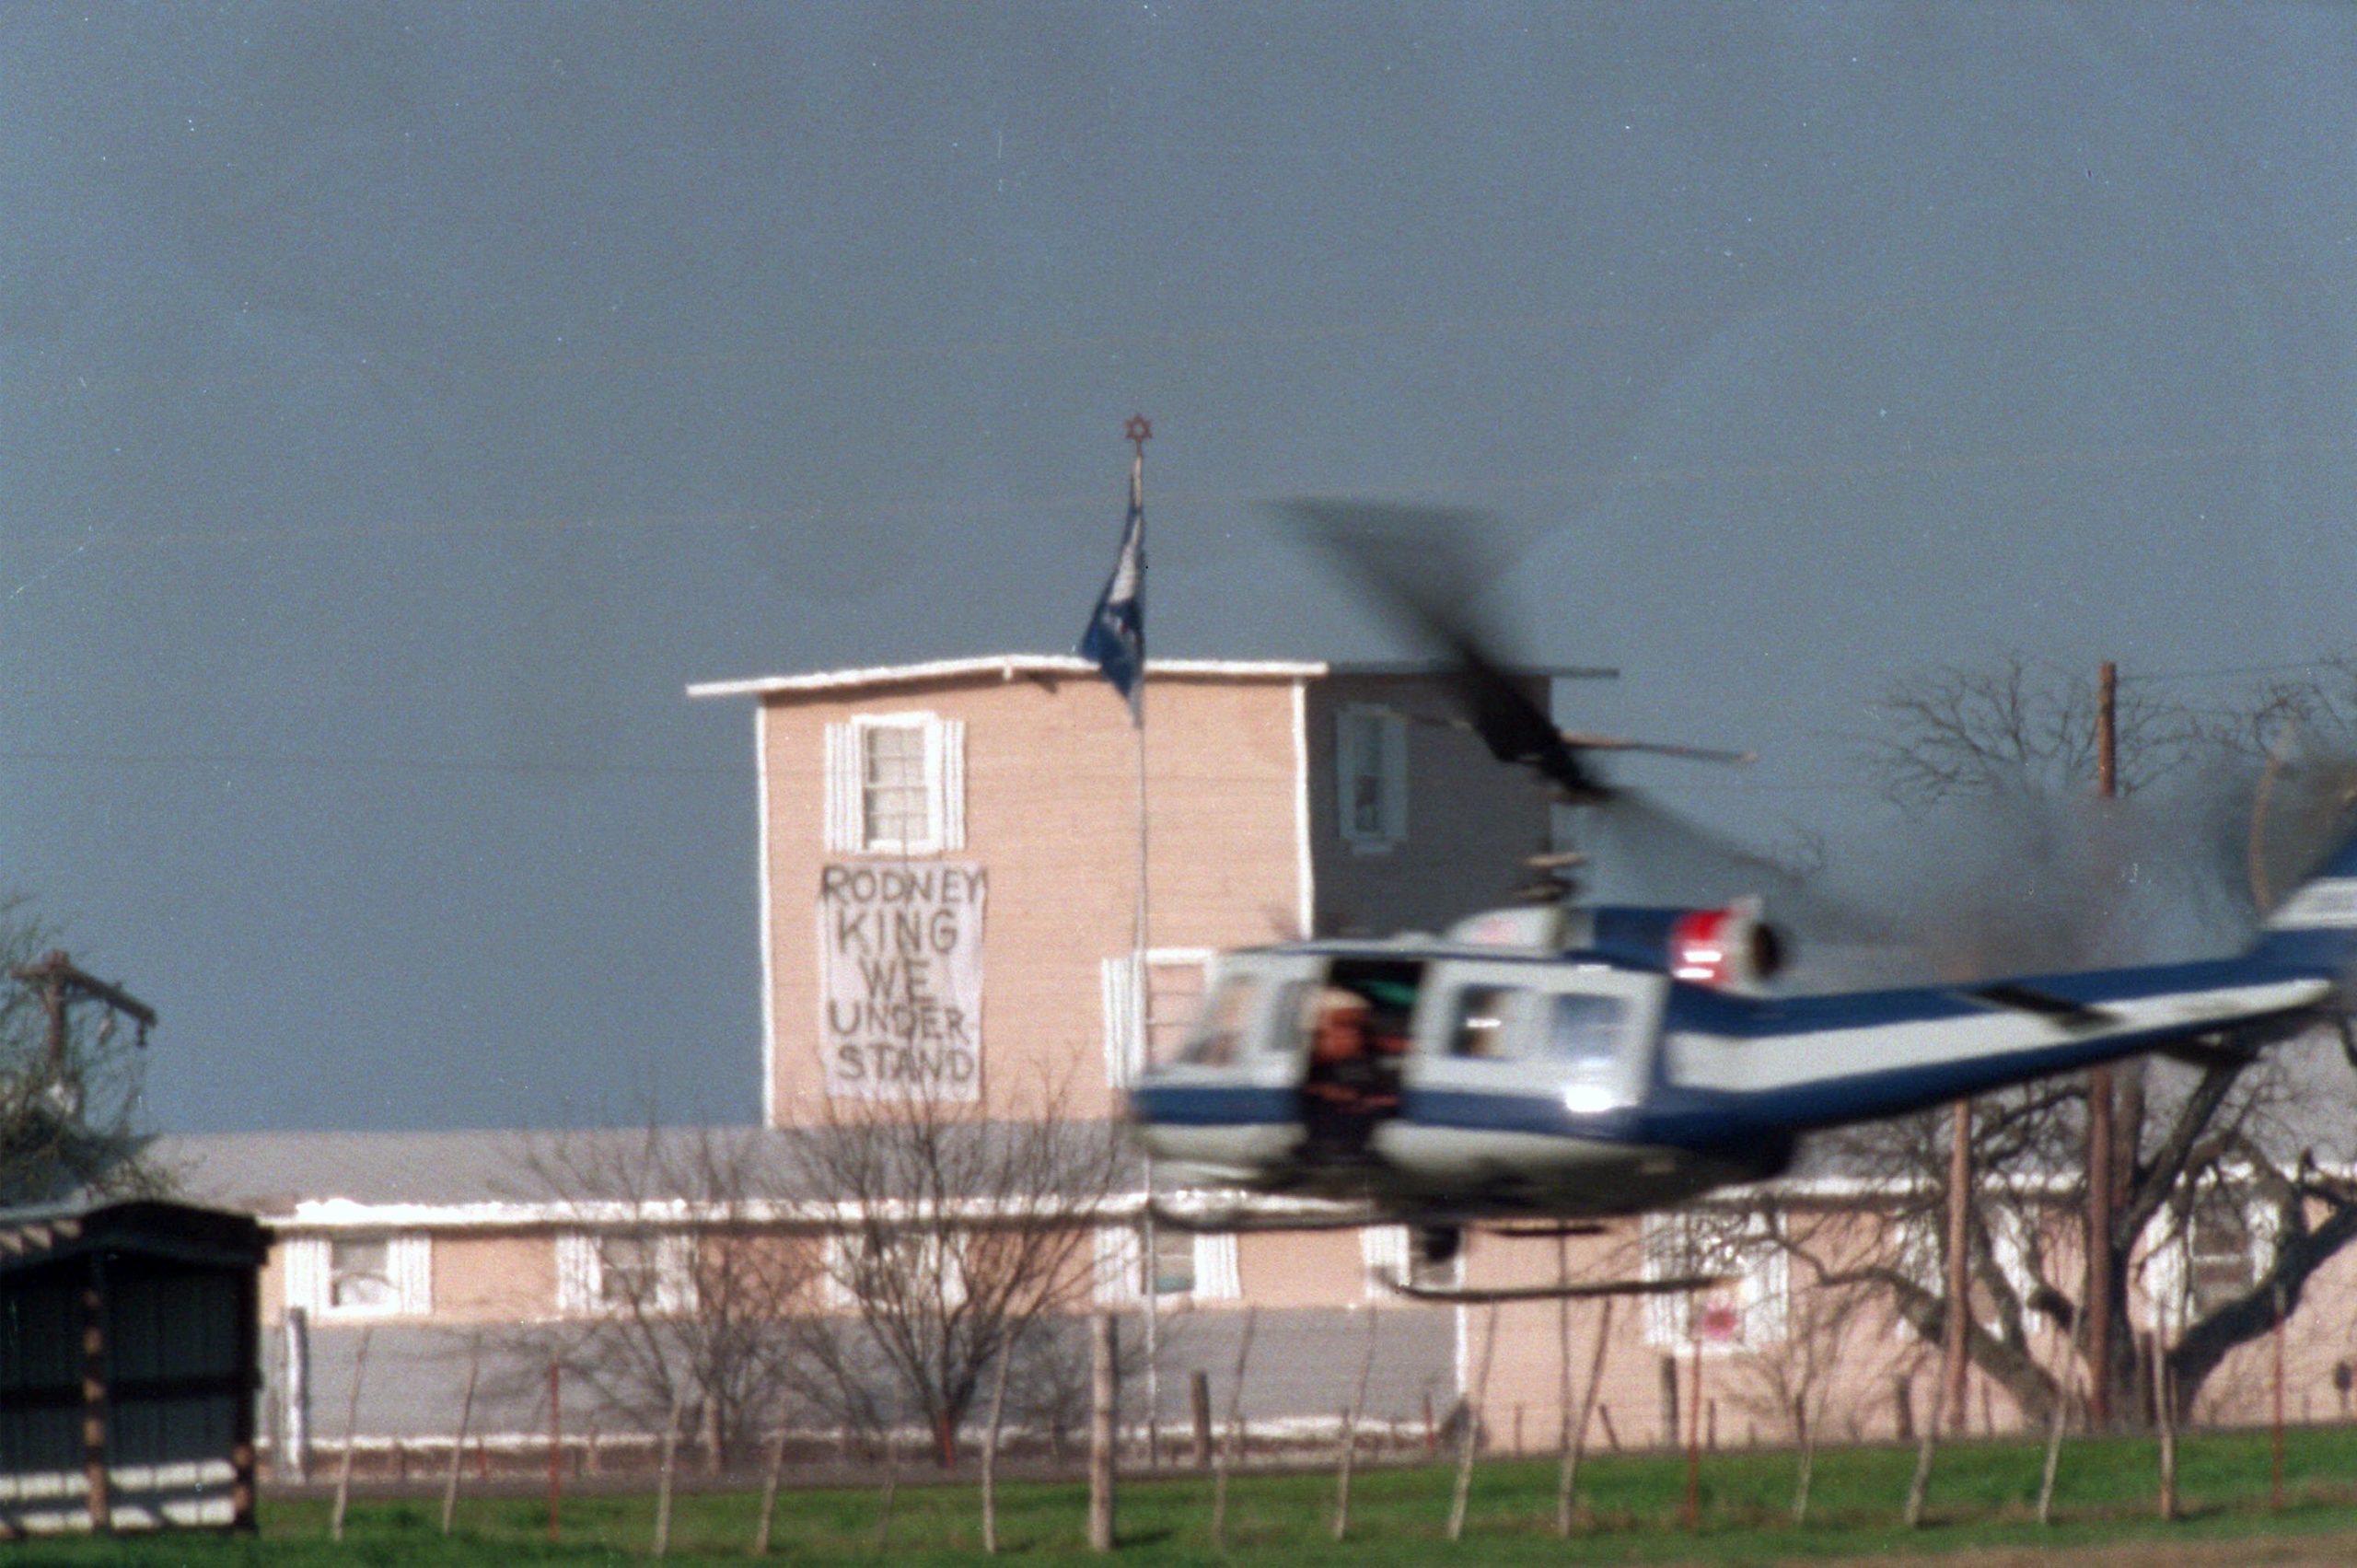 A Texas Department of Public Safety helicopter buzzes past the Mount Carmel Branch Davidian compound in this March 27, 1993, file photo taken near Waco, Texas. The sprawling compound appears to be made of stucco, with a long ranch-style area and a multi-story unit towering over the rest. Bare scrubby trees surround the property. A banner hanging from the tall building reads Rodney King We Understand.